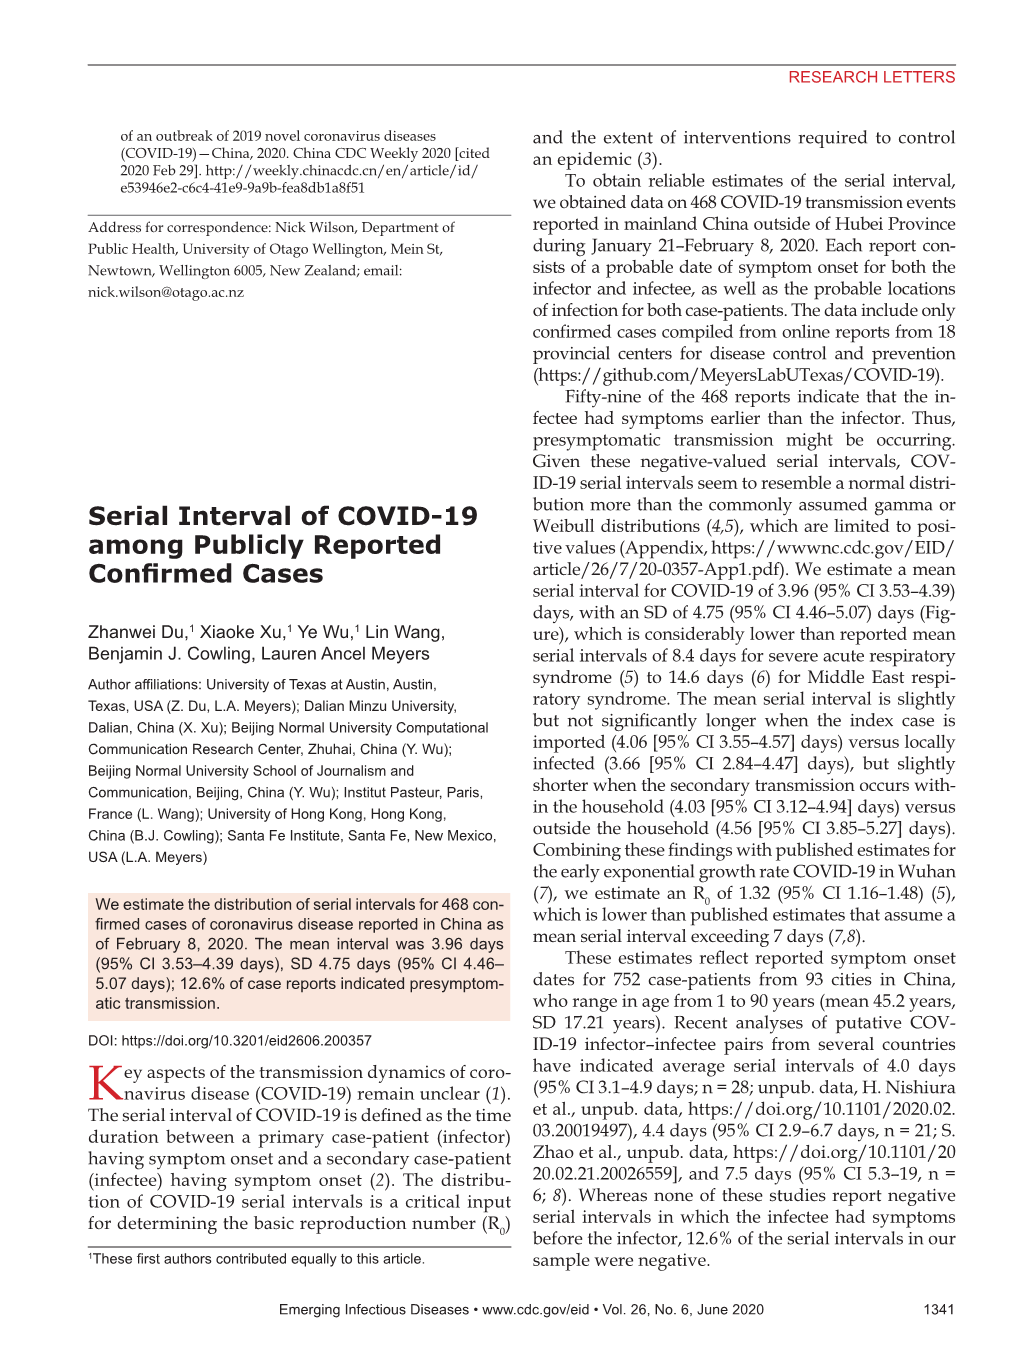 Serial Interval of COVID-19 Among Publicly Reported Confirmed Cases